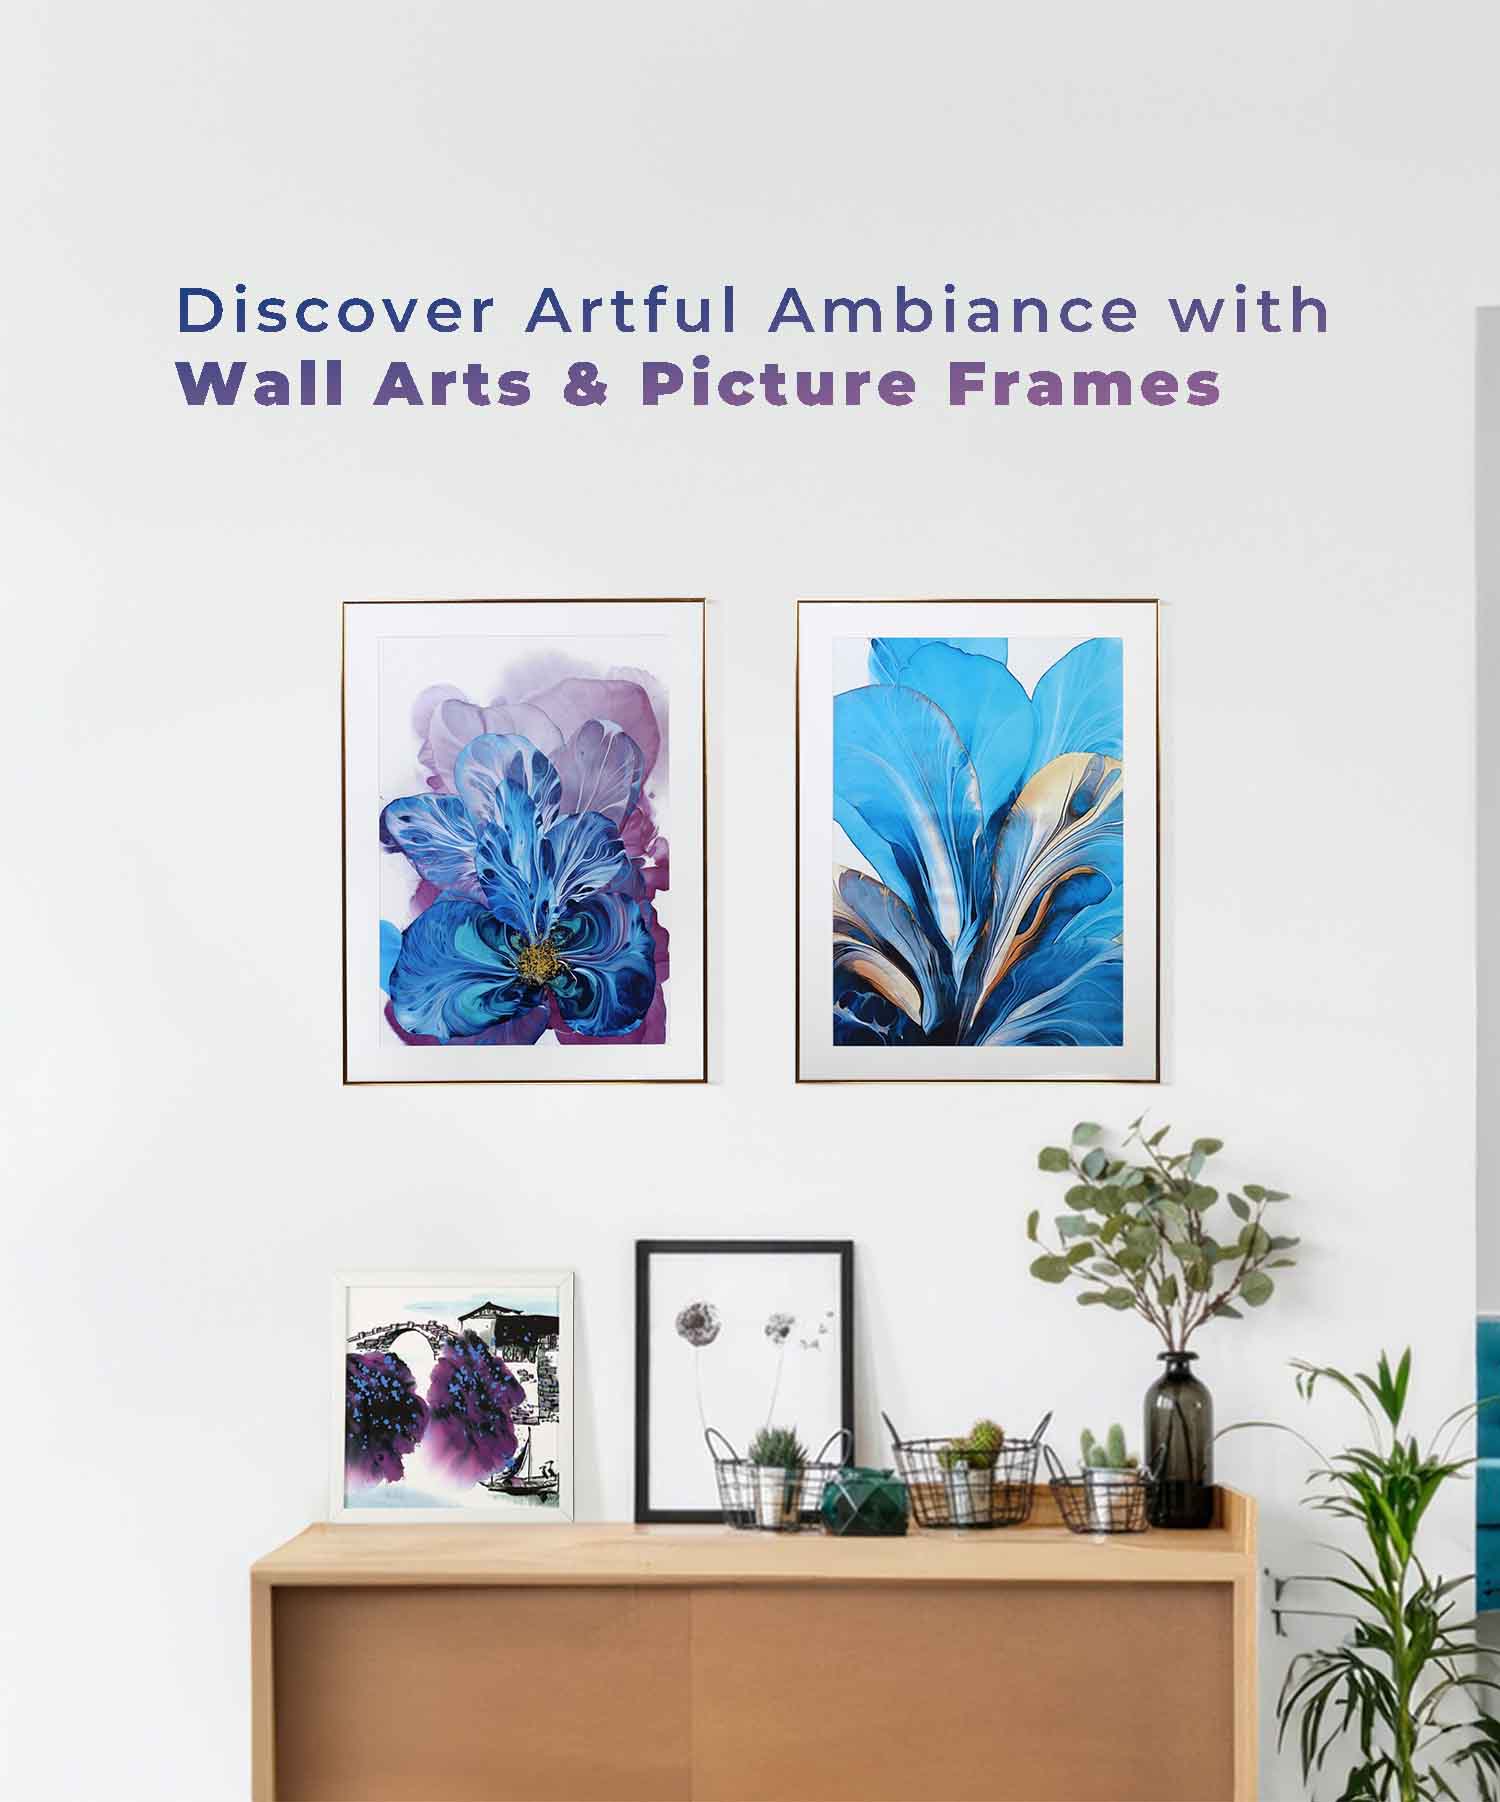 wall arts, picture frames